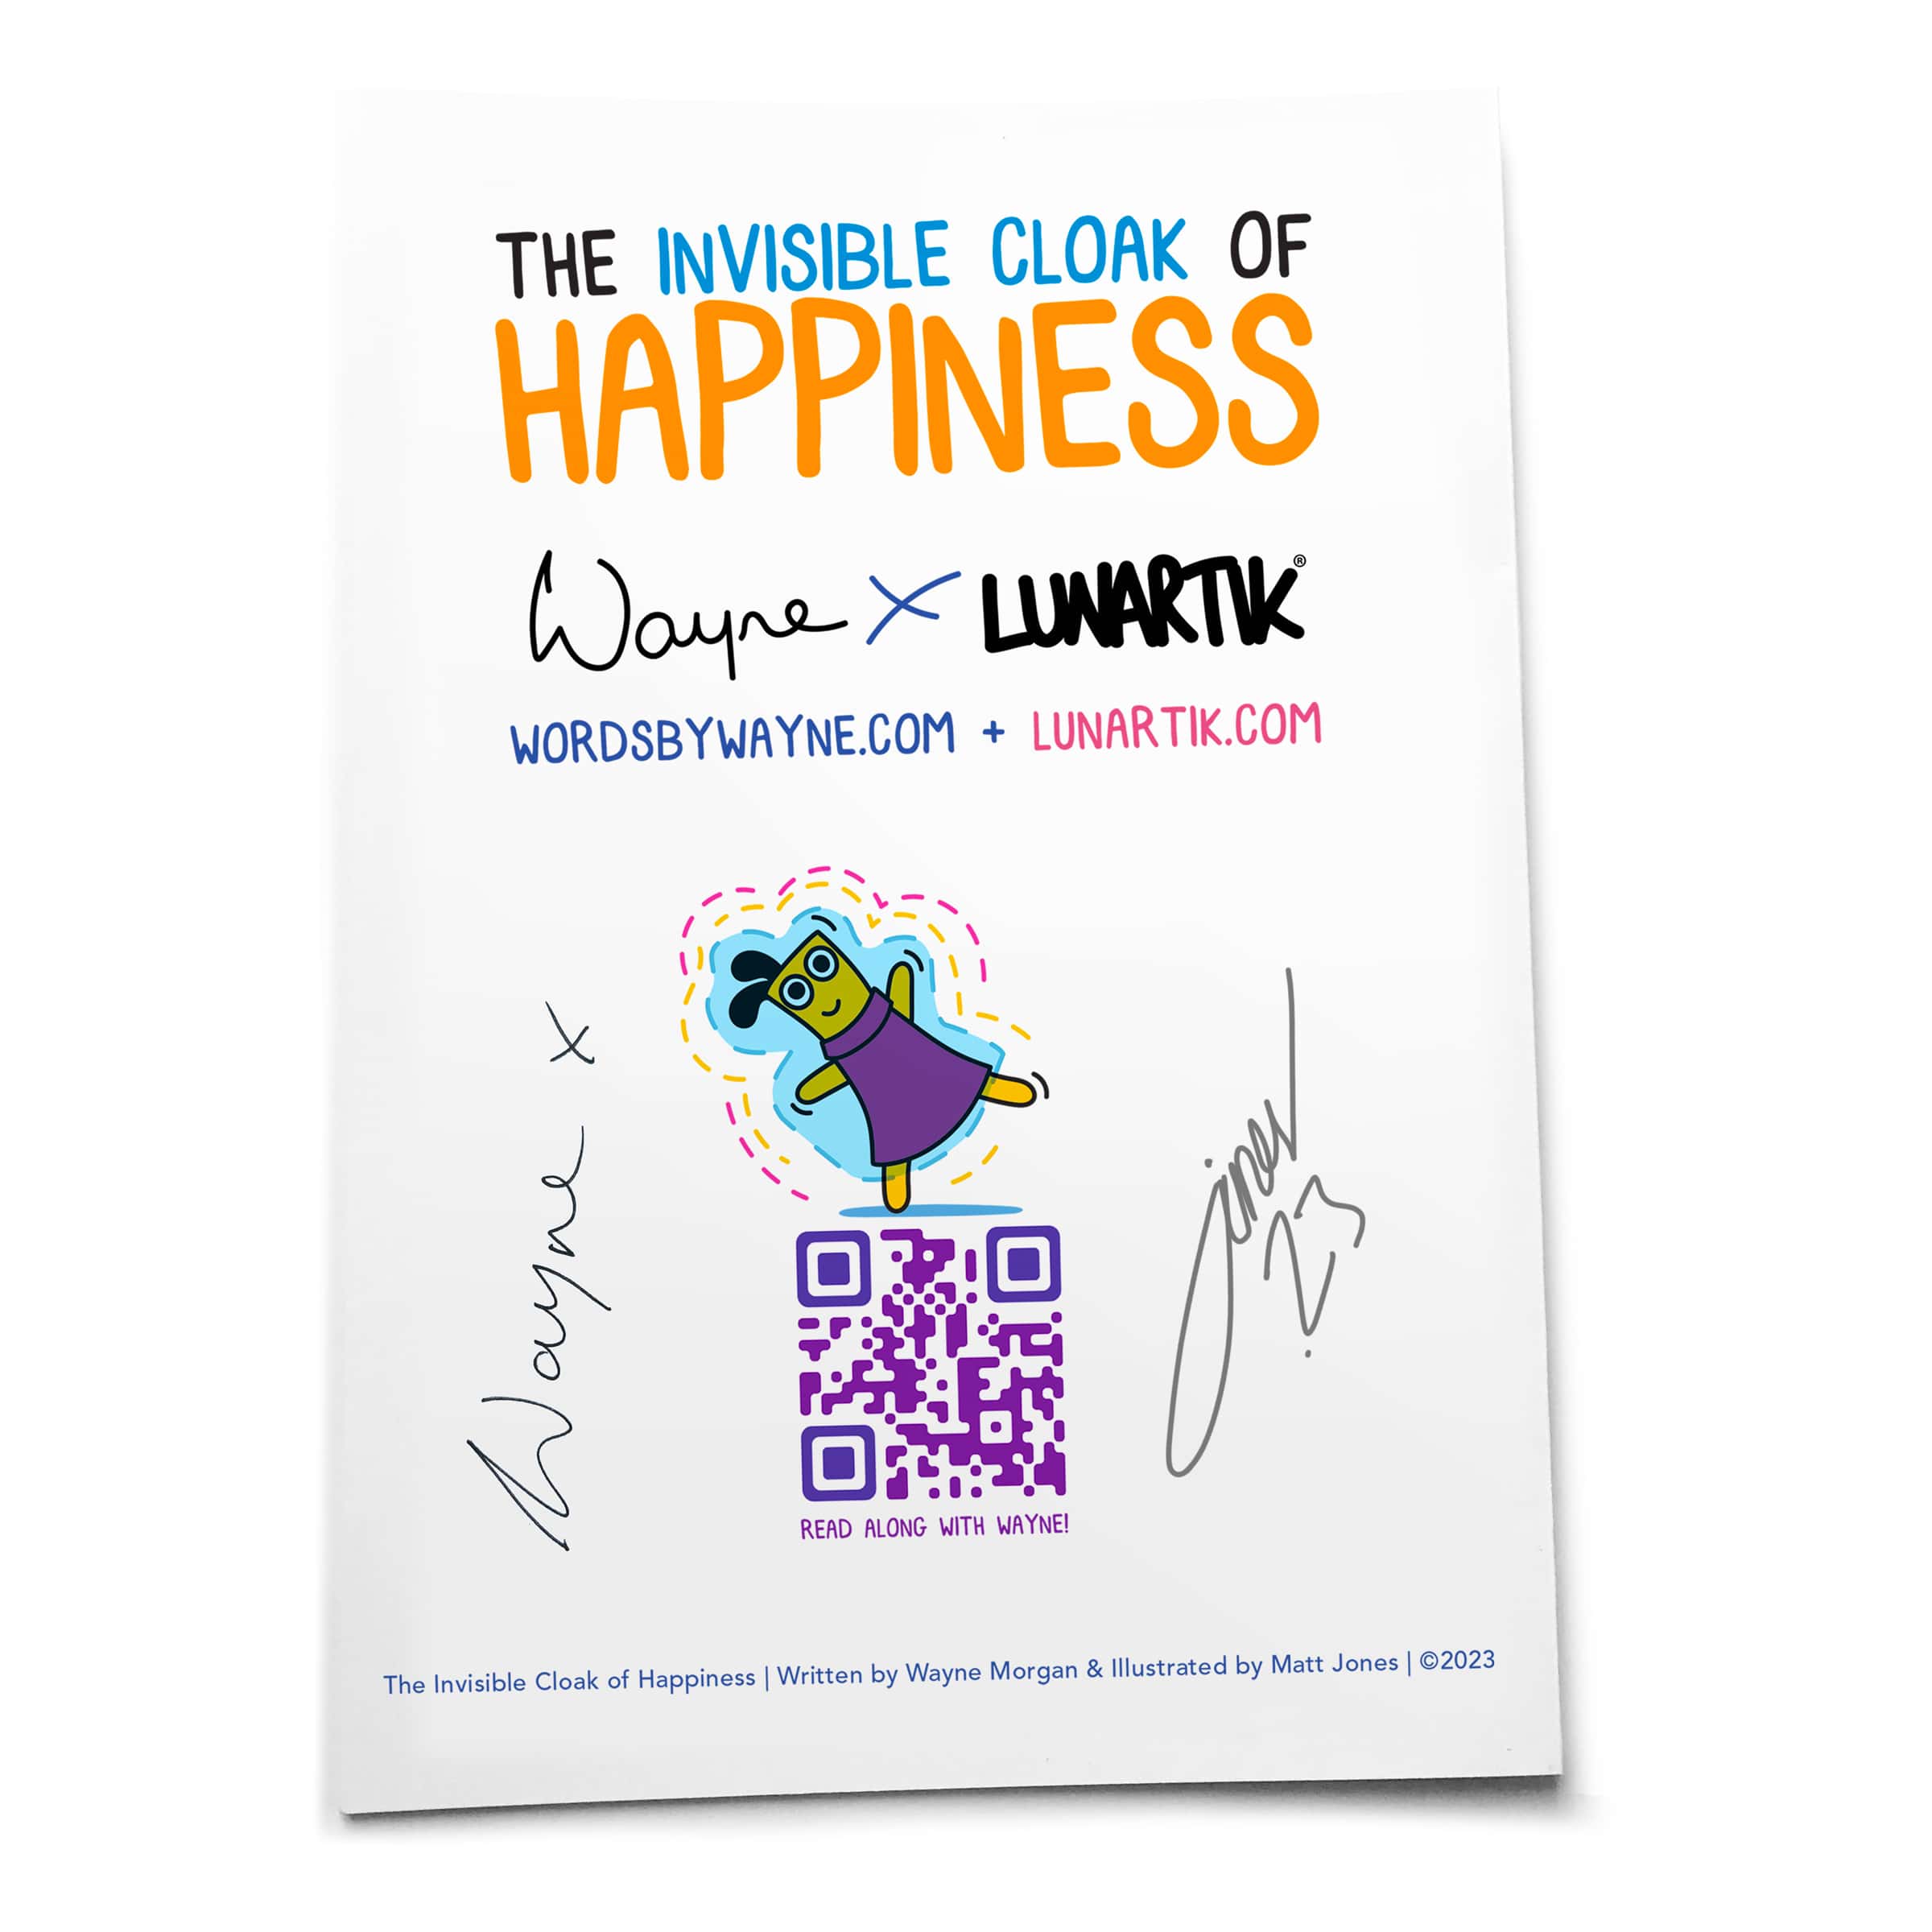 The Invisible Cloak of Happiness Book by Wayne and Lunartik